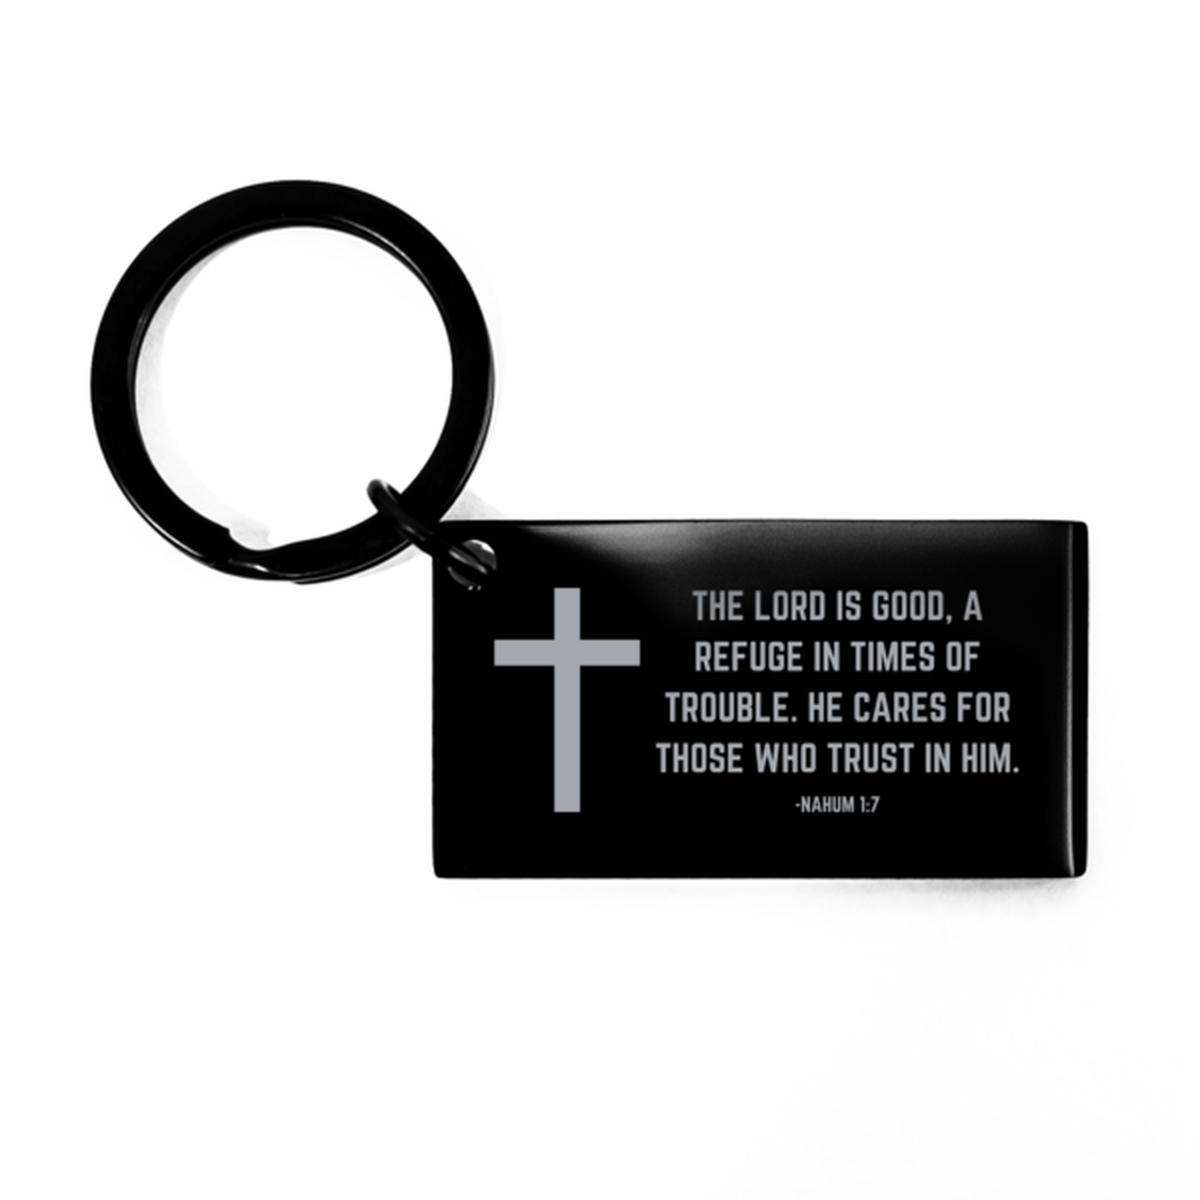 Baptism Gifts For Teenage Boys Girls, Christian Bible Verse Black Keychain, The Lord is good, Confirmation Gifts, Bible Verse Keyring for Son, Godson, Grandson, Nephew